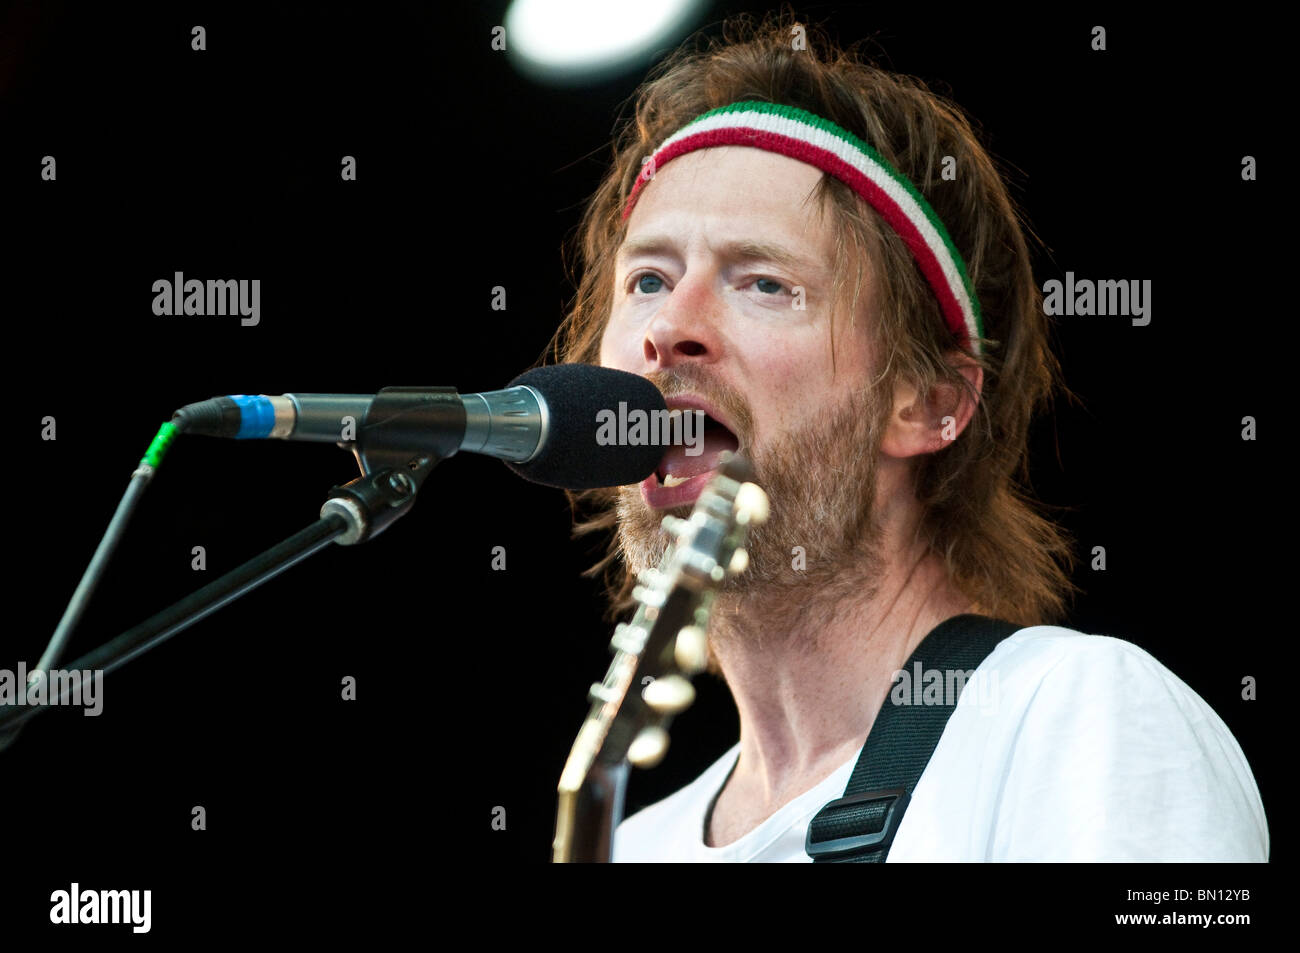 Thom York, special guest at Glastonbury 2010 performing live and singing into a microphone Stock Photo